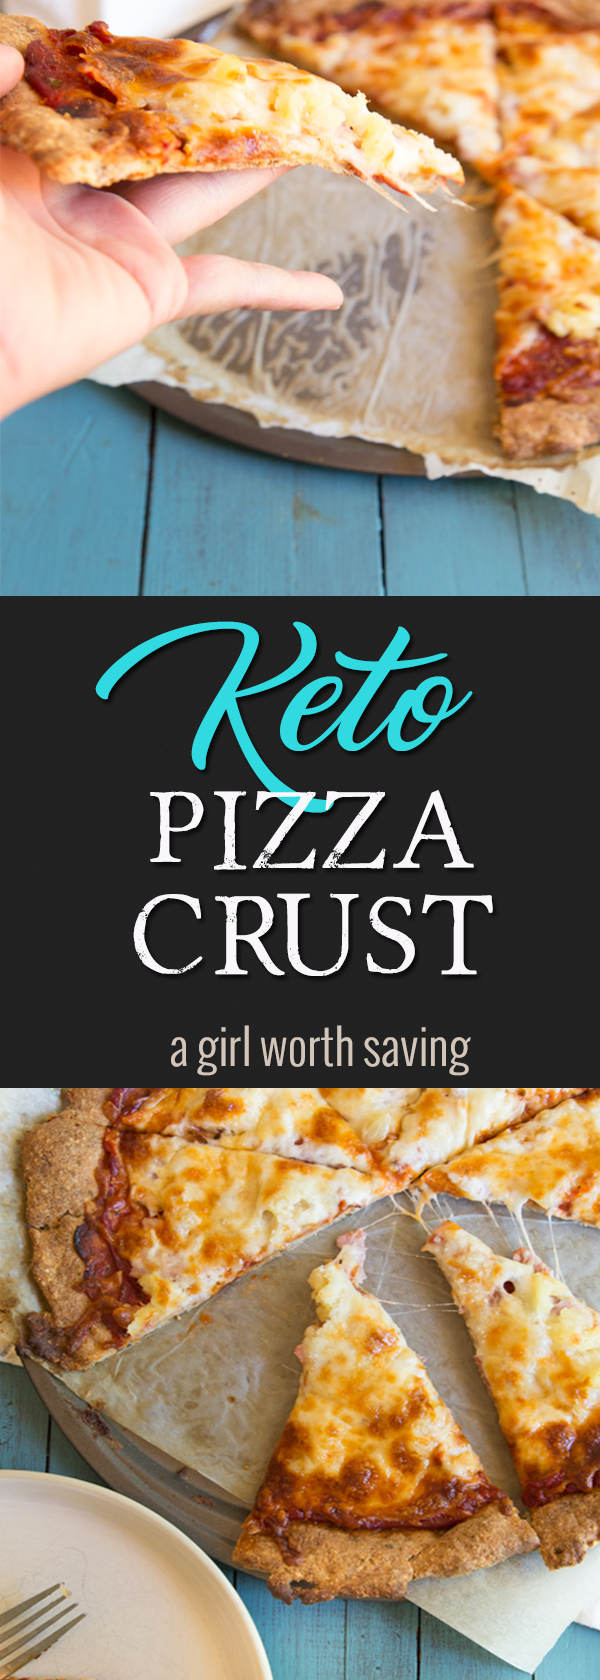 This is the best keto pizza crust recipe that's made with almond flour. Seriously, it has a great bready chew and holds up under a huge pile of toppings!